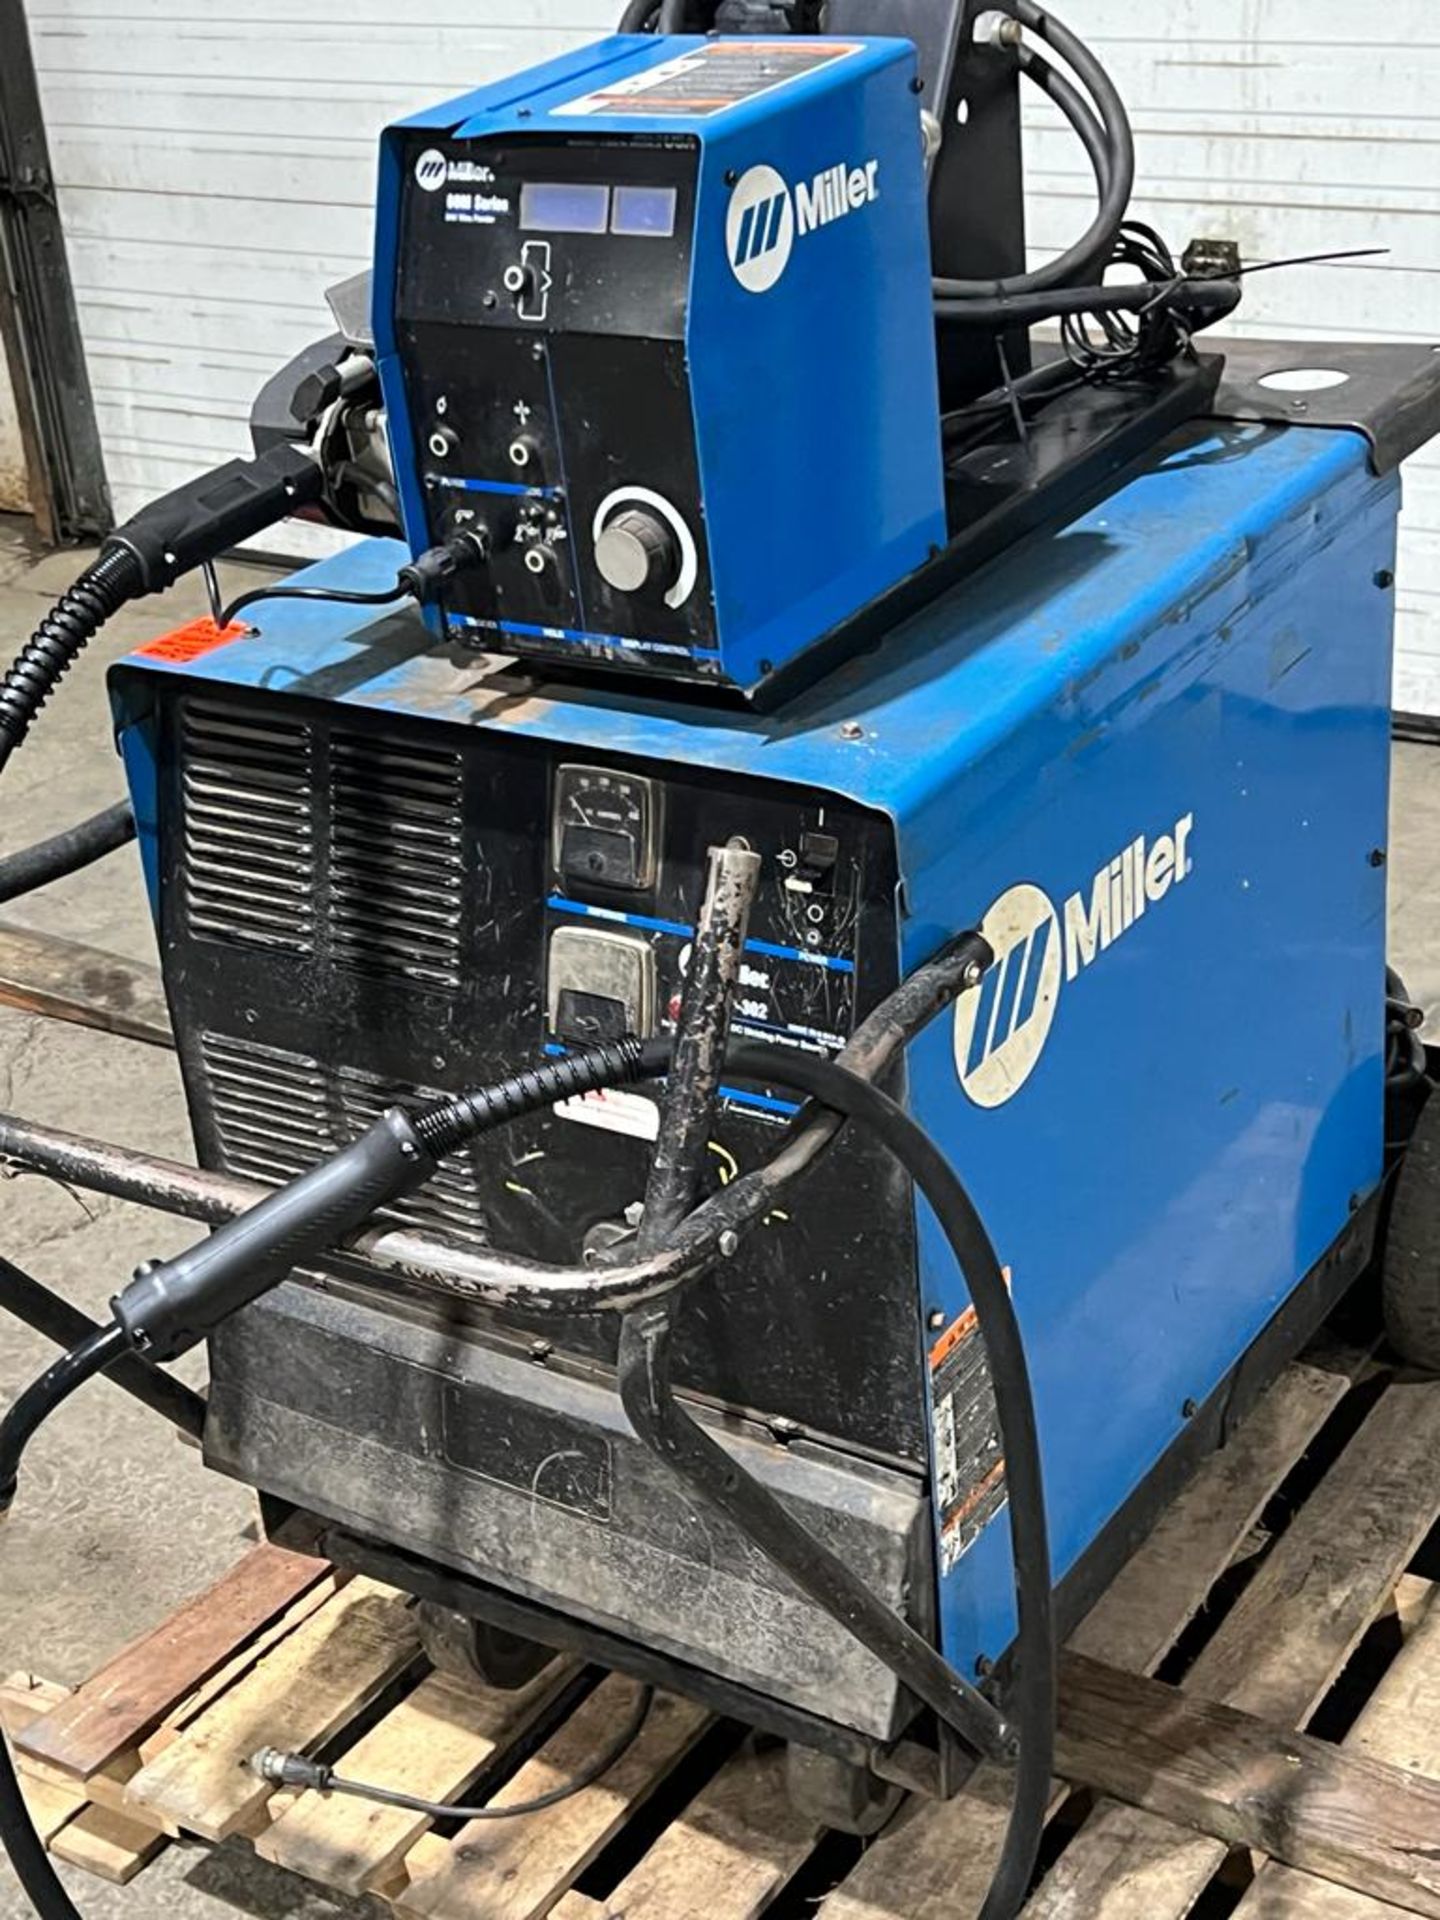 Miller CP-302 Mig Welder 300 Amp Mig with 60 Series 4-Wheel Wire Feeder with Mig Gun and cables - Image 3 of 3